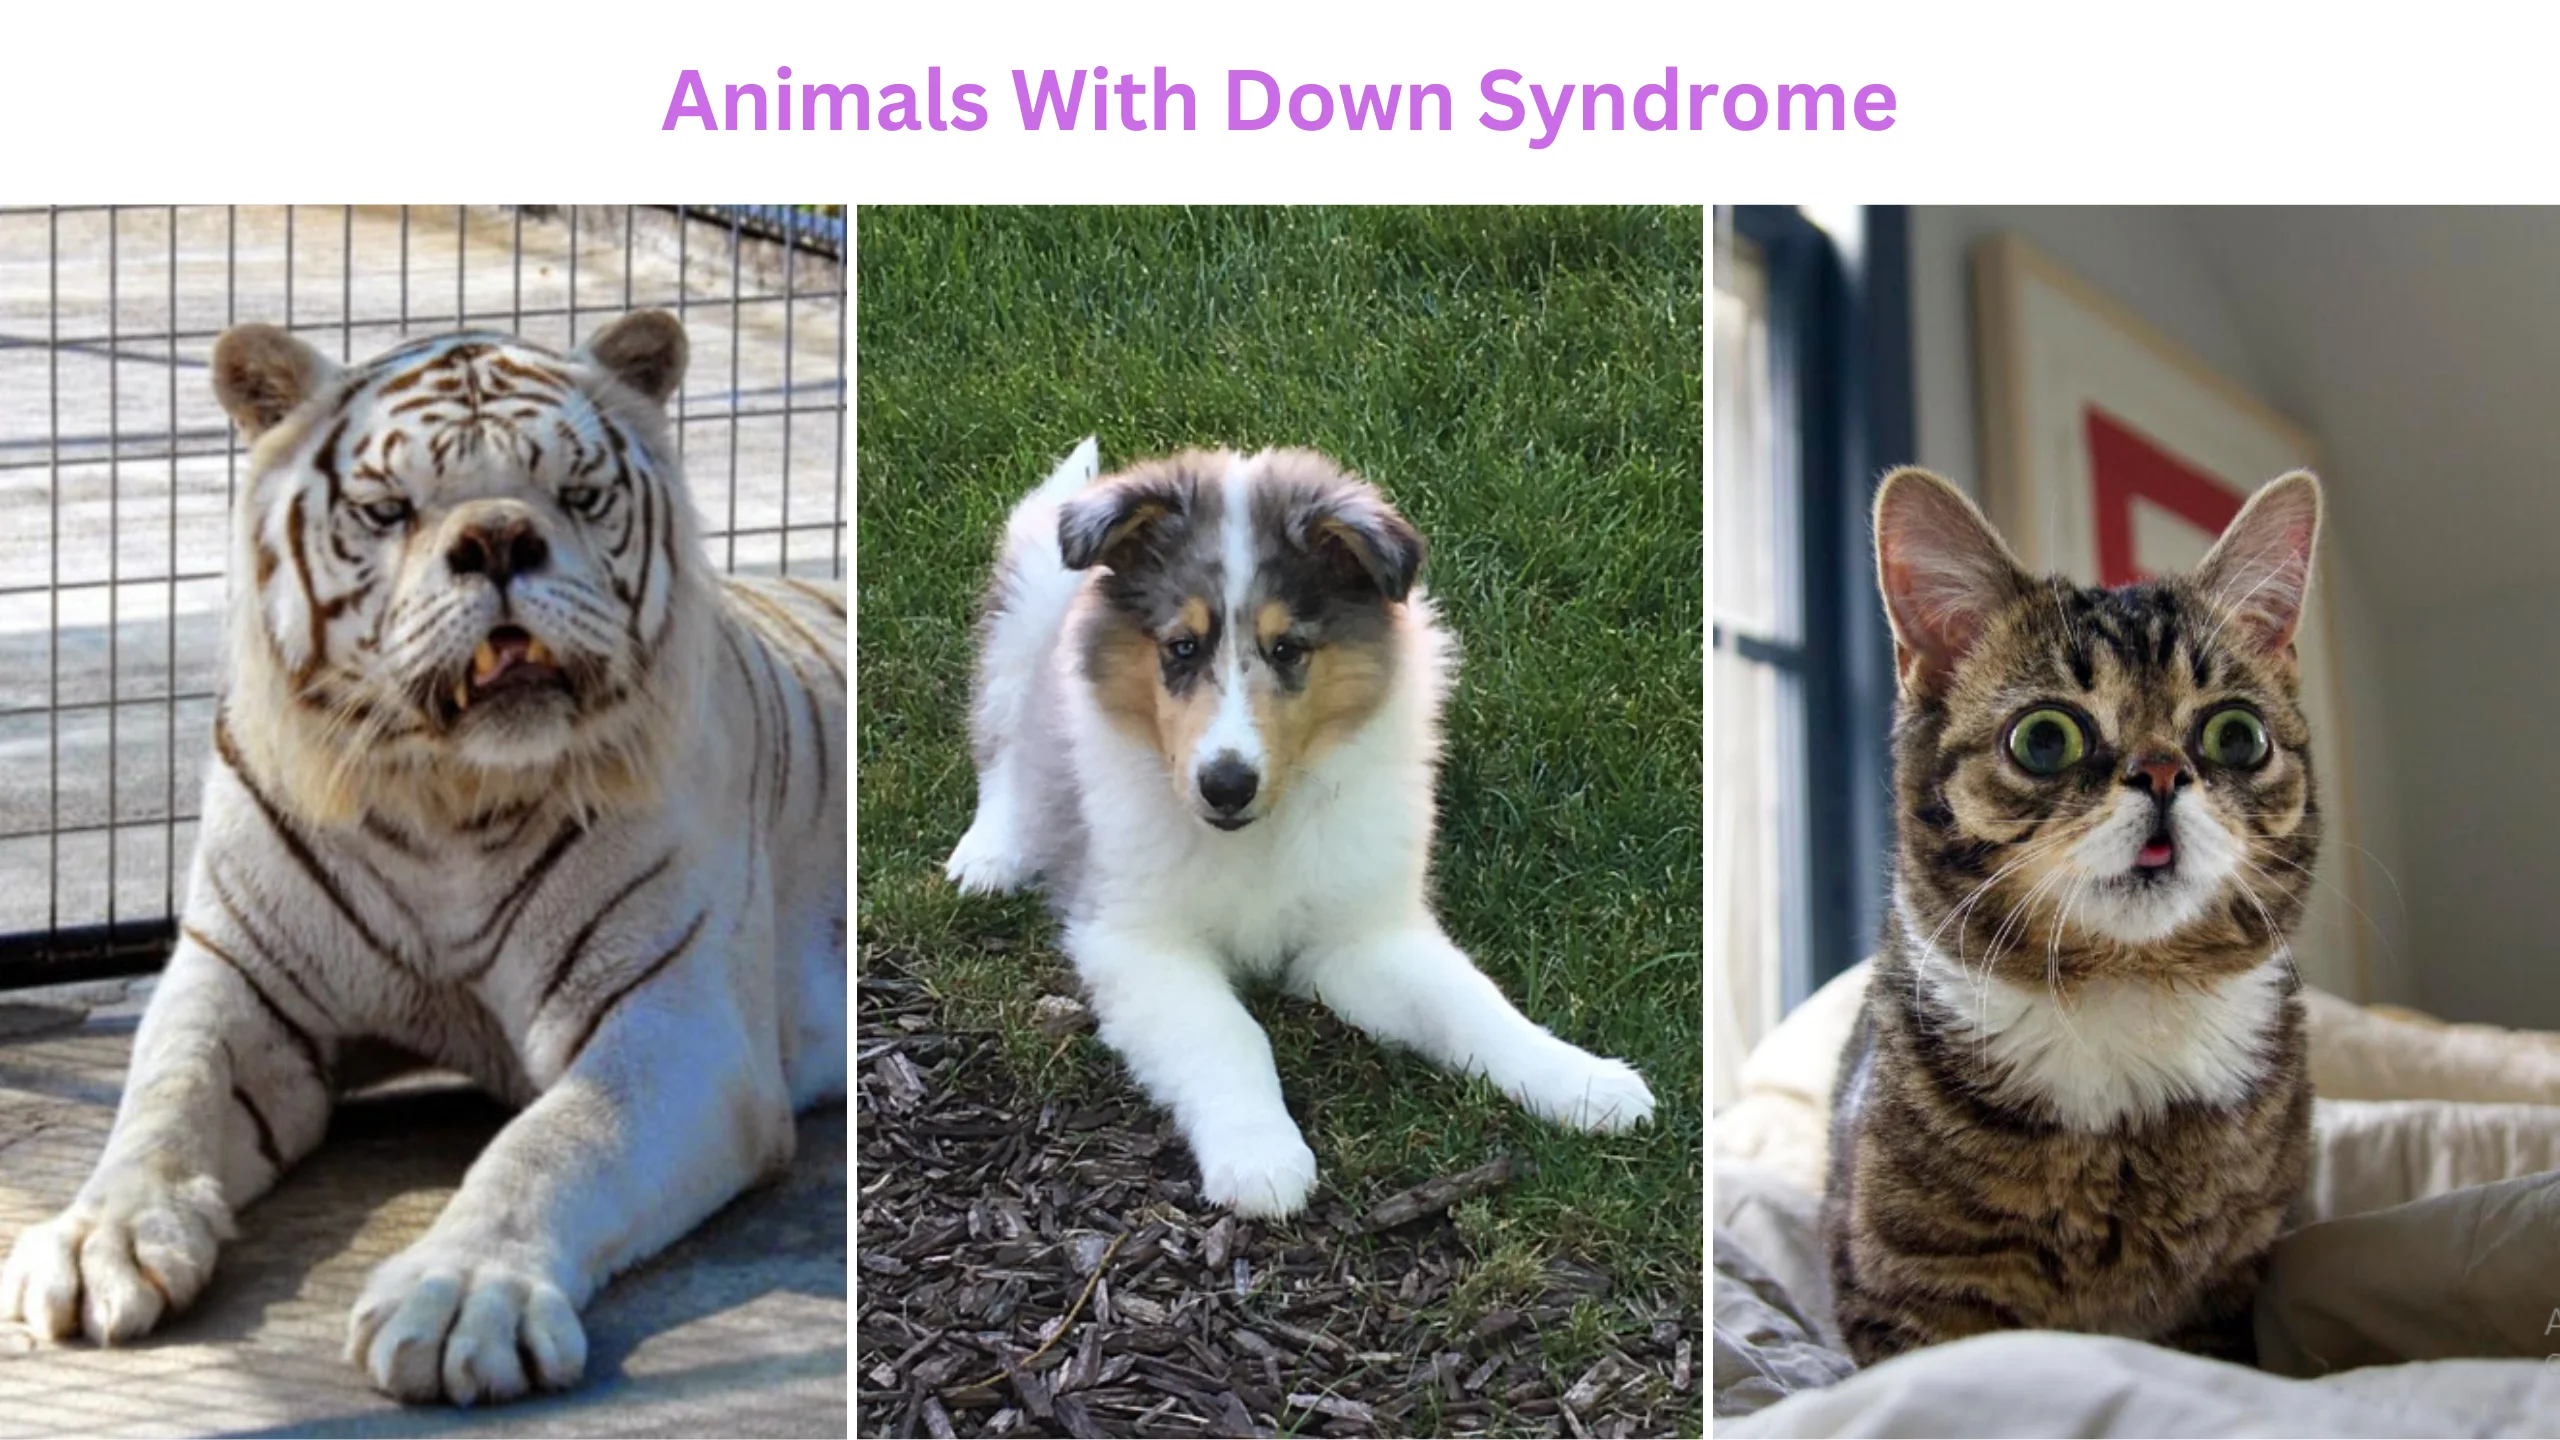 Animals with Down syndrome